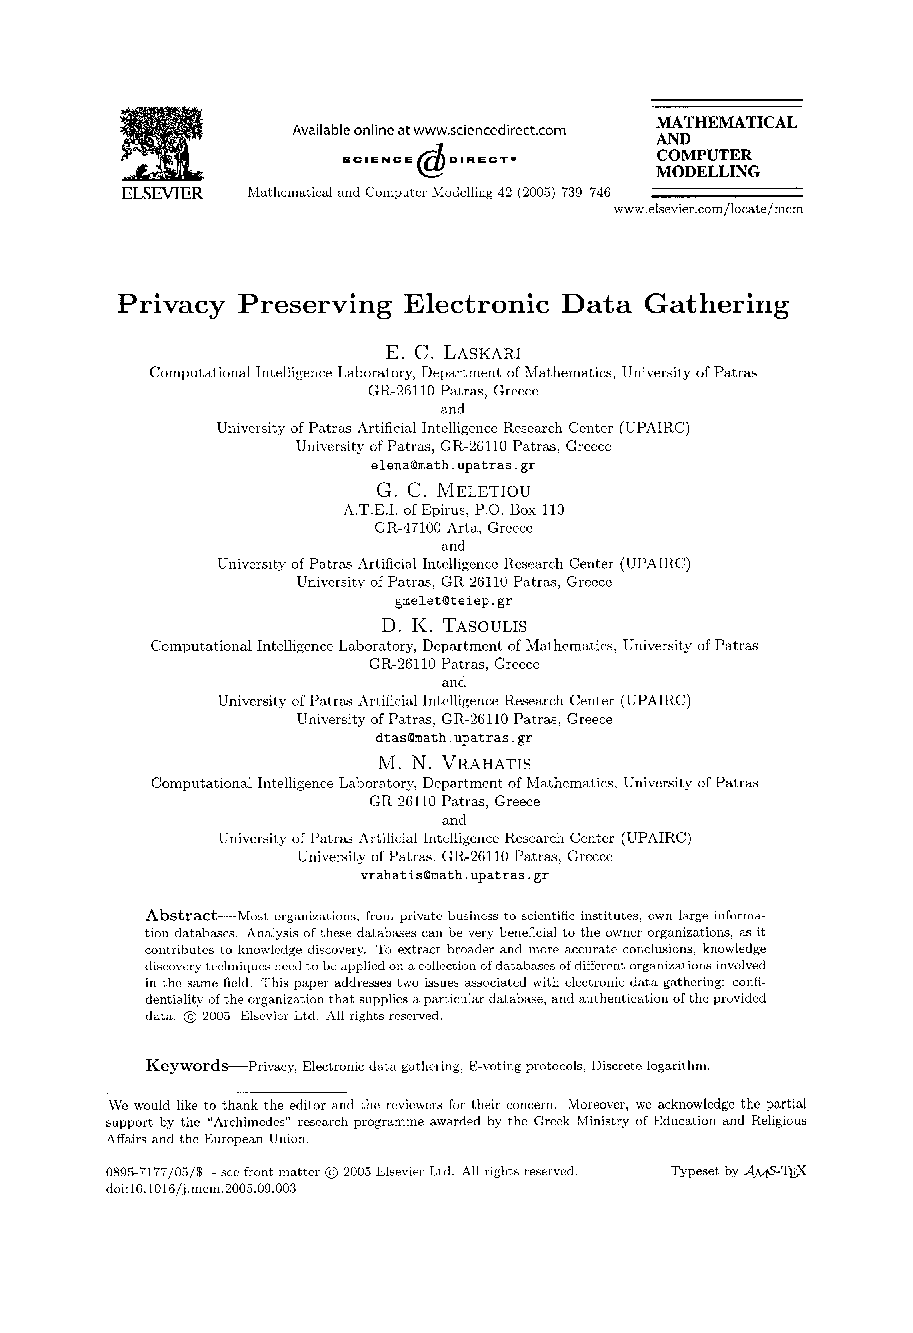 Privacy preserving electronic data gathering